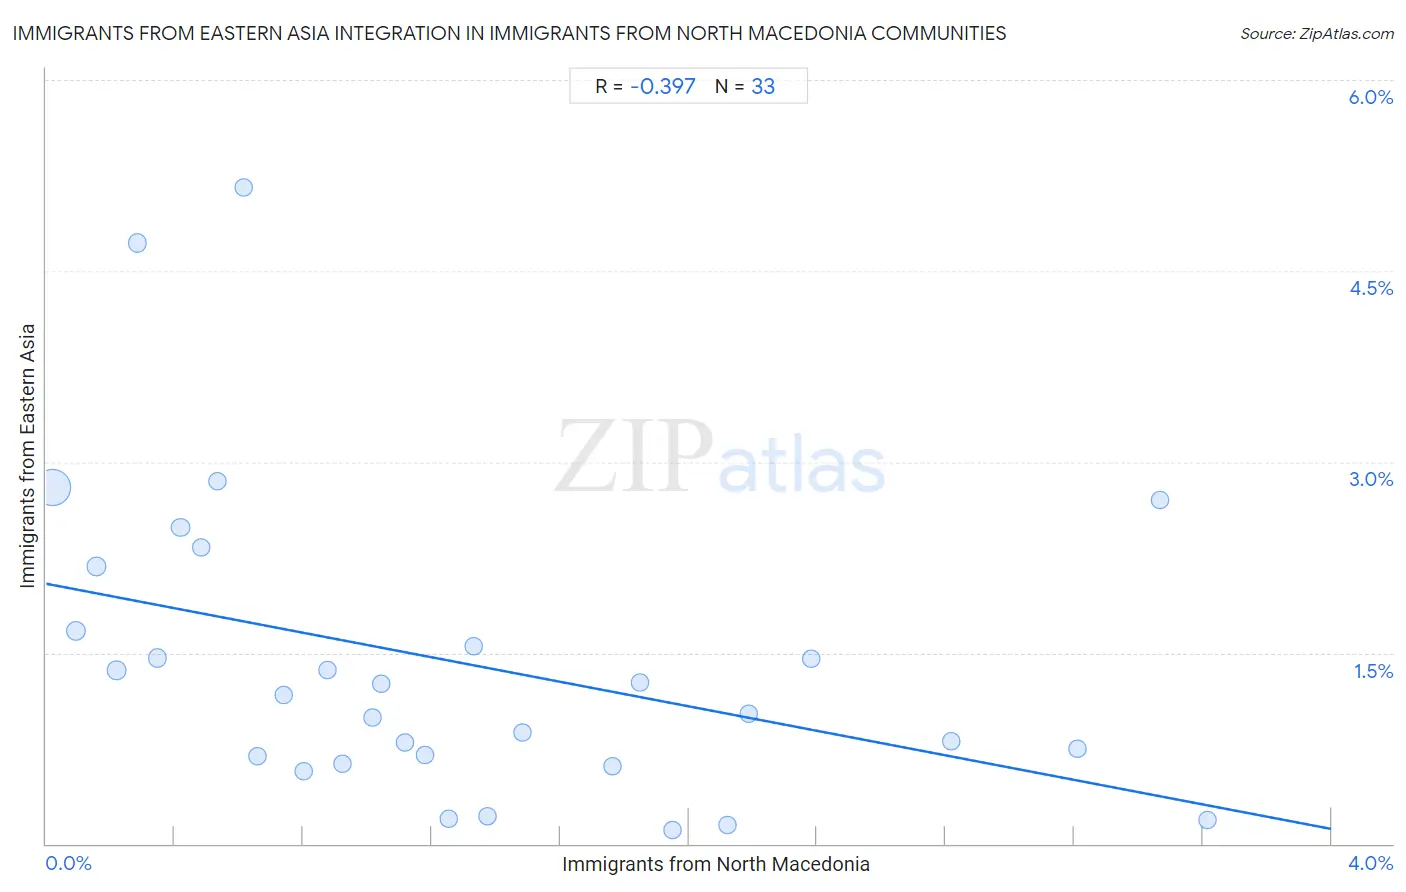 Immigrants from North Macedonia Integration in Immigrants from Eastern Asia Communities